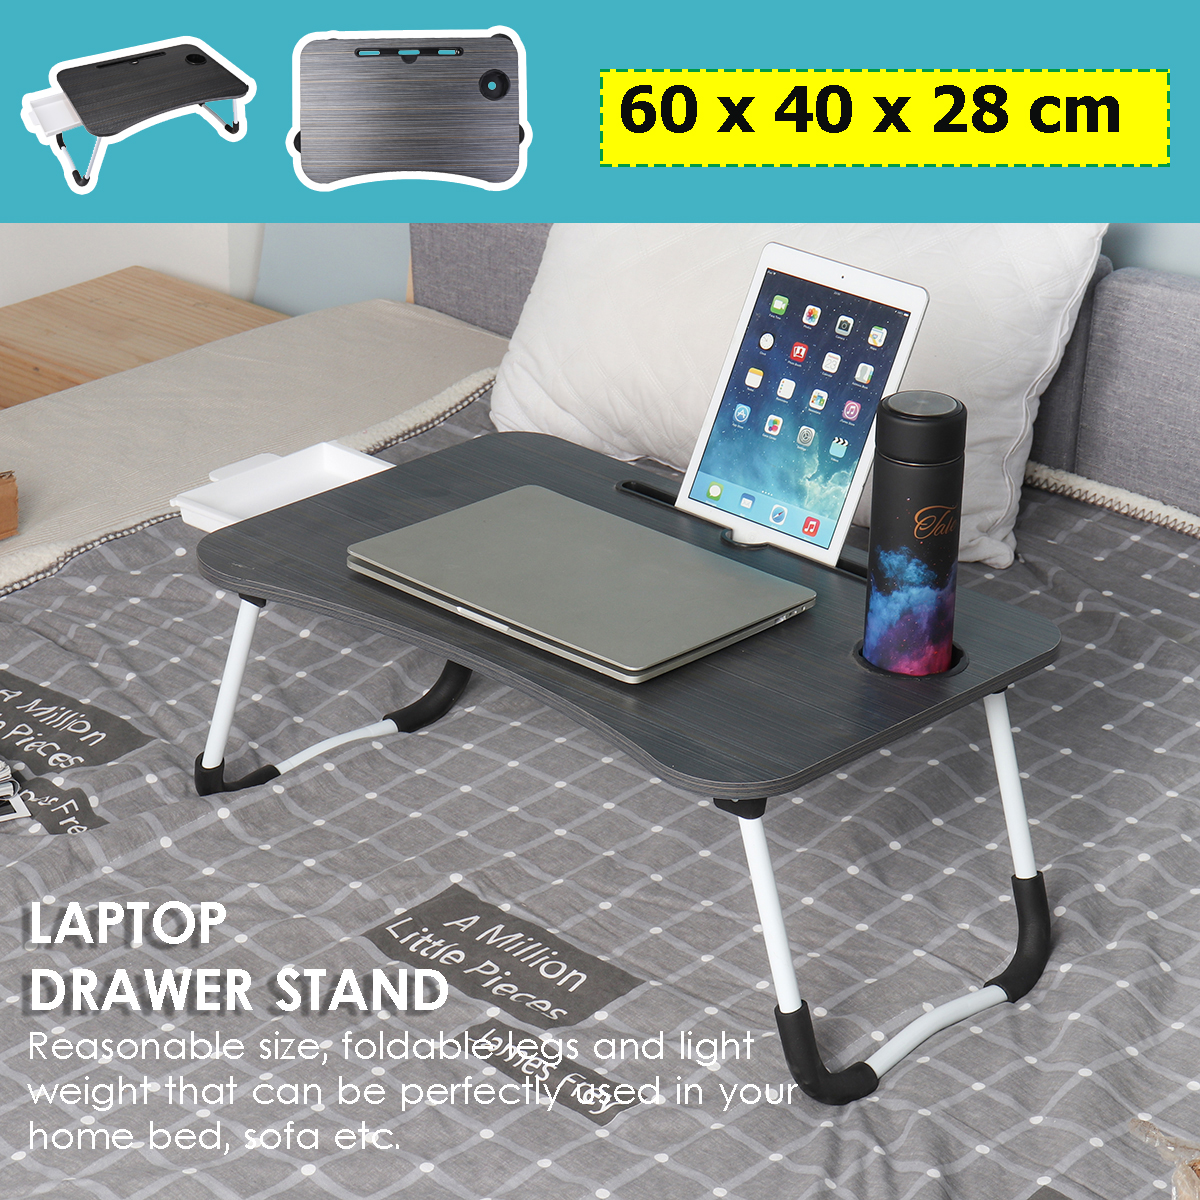 Laptop-Table-Stand-with-Small-Drawer-Portable-Folding-Desk-Notebook-Table-Stand-Lap-Tray-Bed-for-Chi-1728170-1